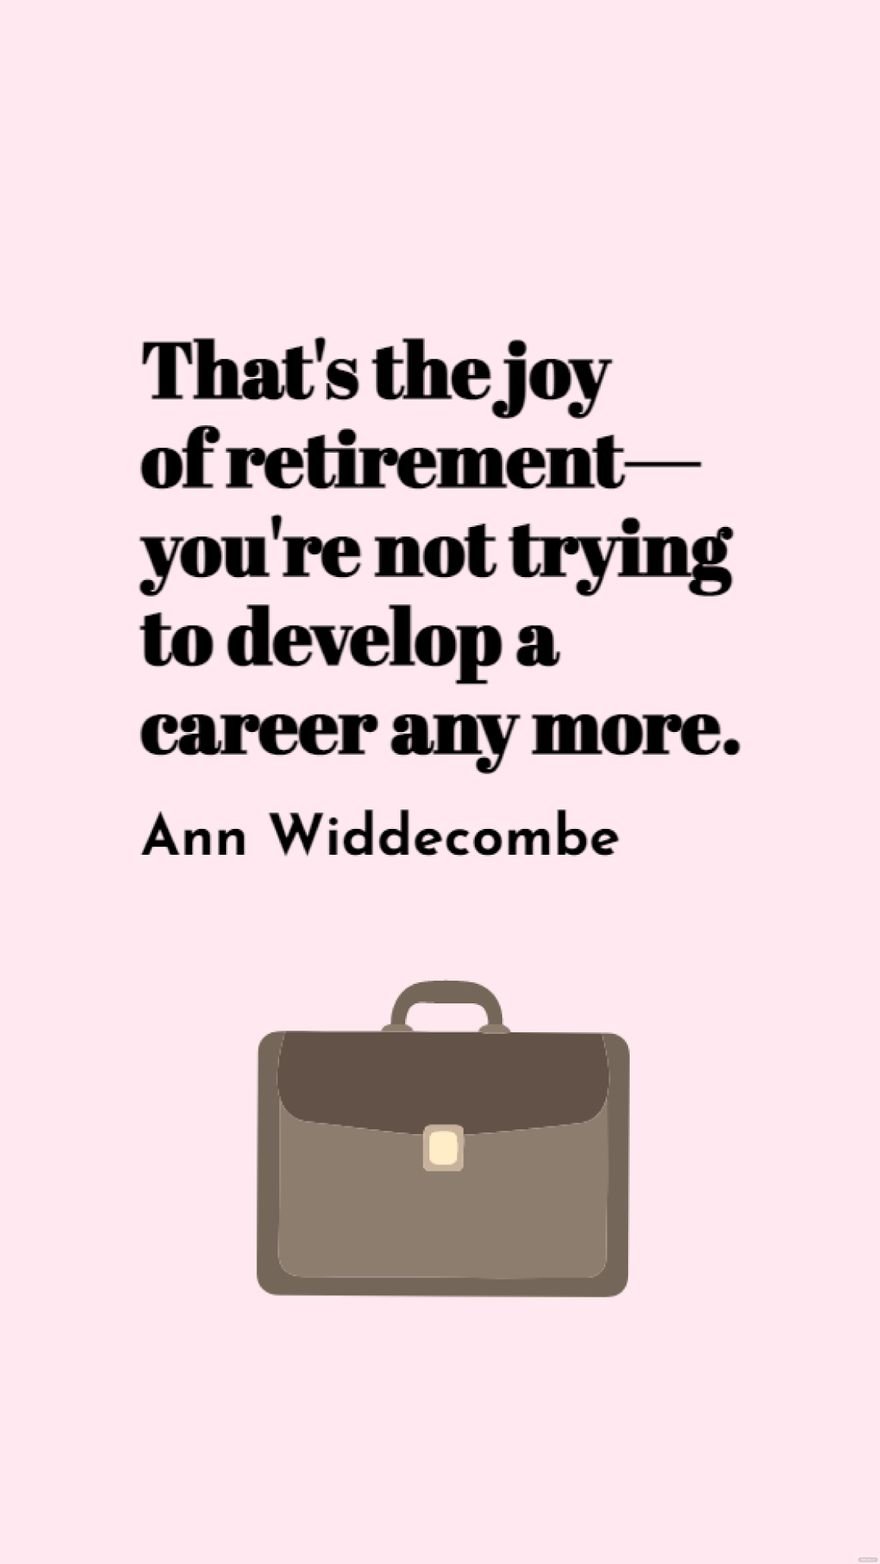 Ann Widdecombe - That's the joy of retirement - you're not trying to develop a career any more. in JPG